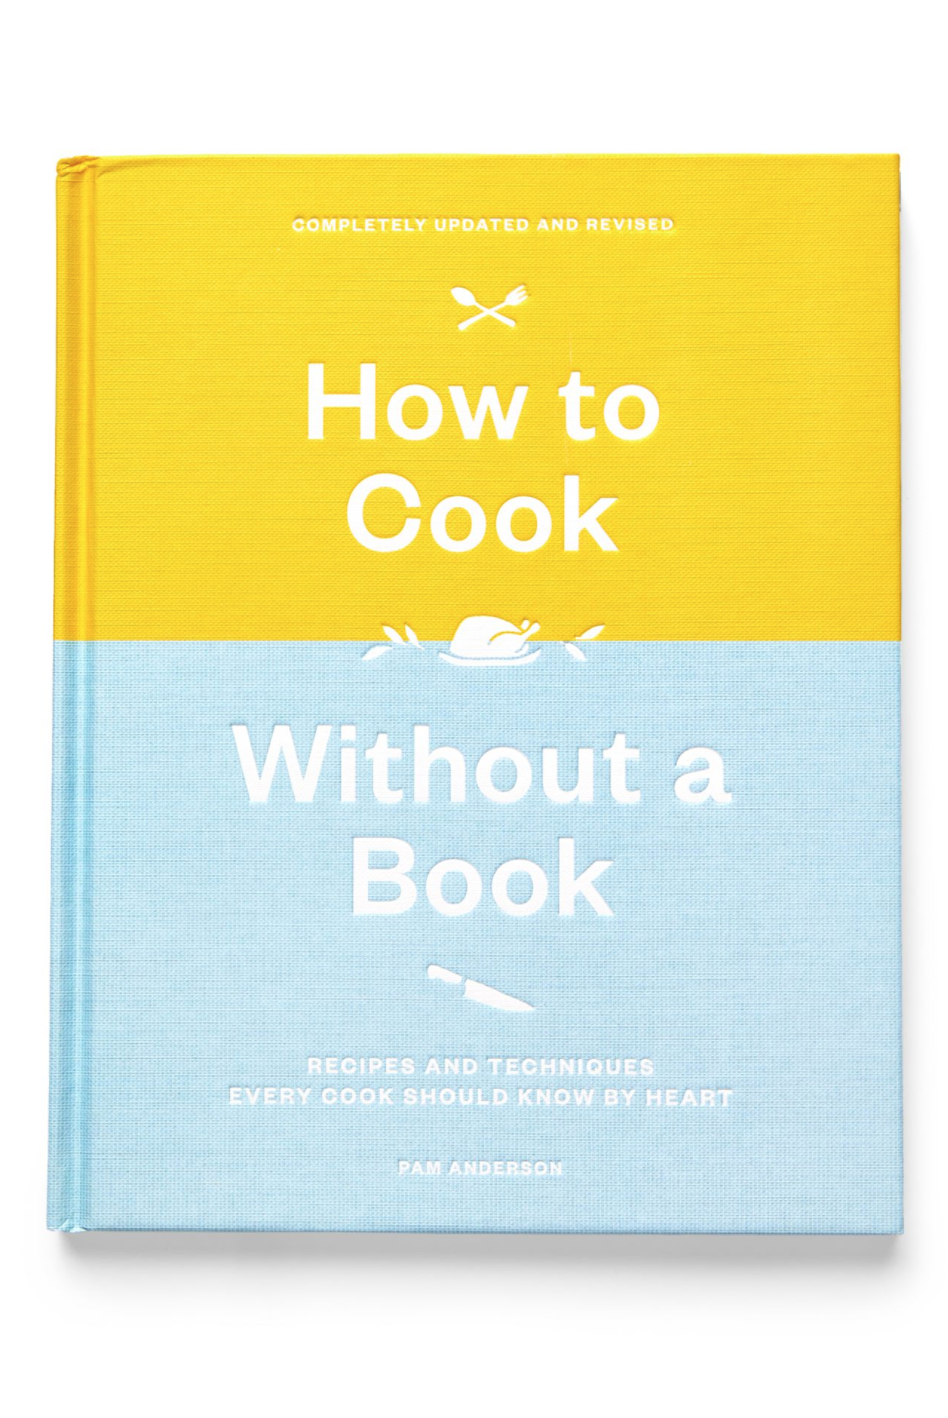 'How to Cook Without a Book' by Pam Anderson